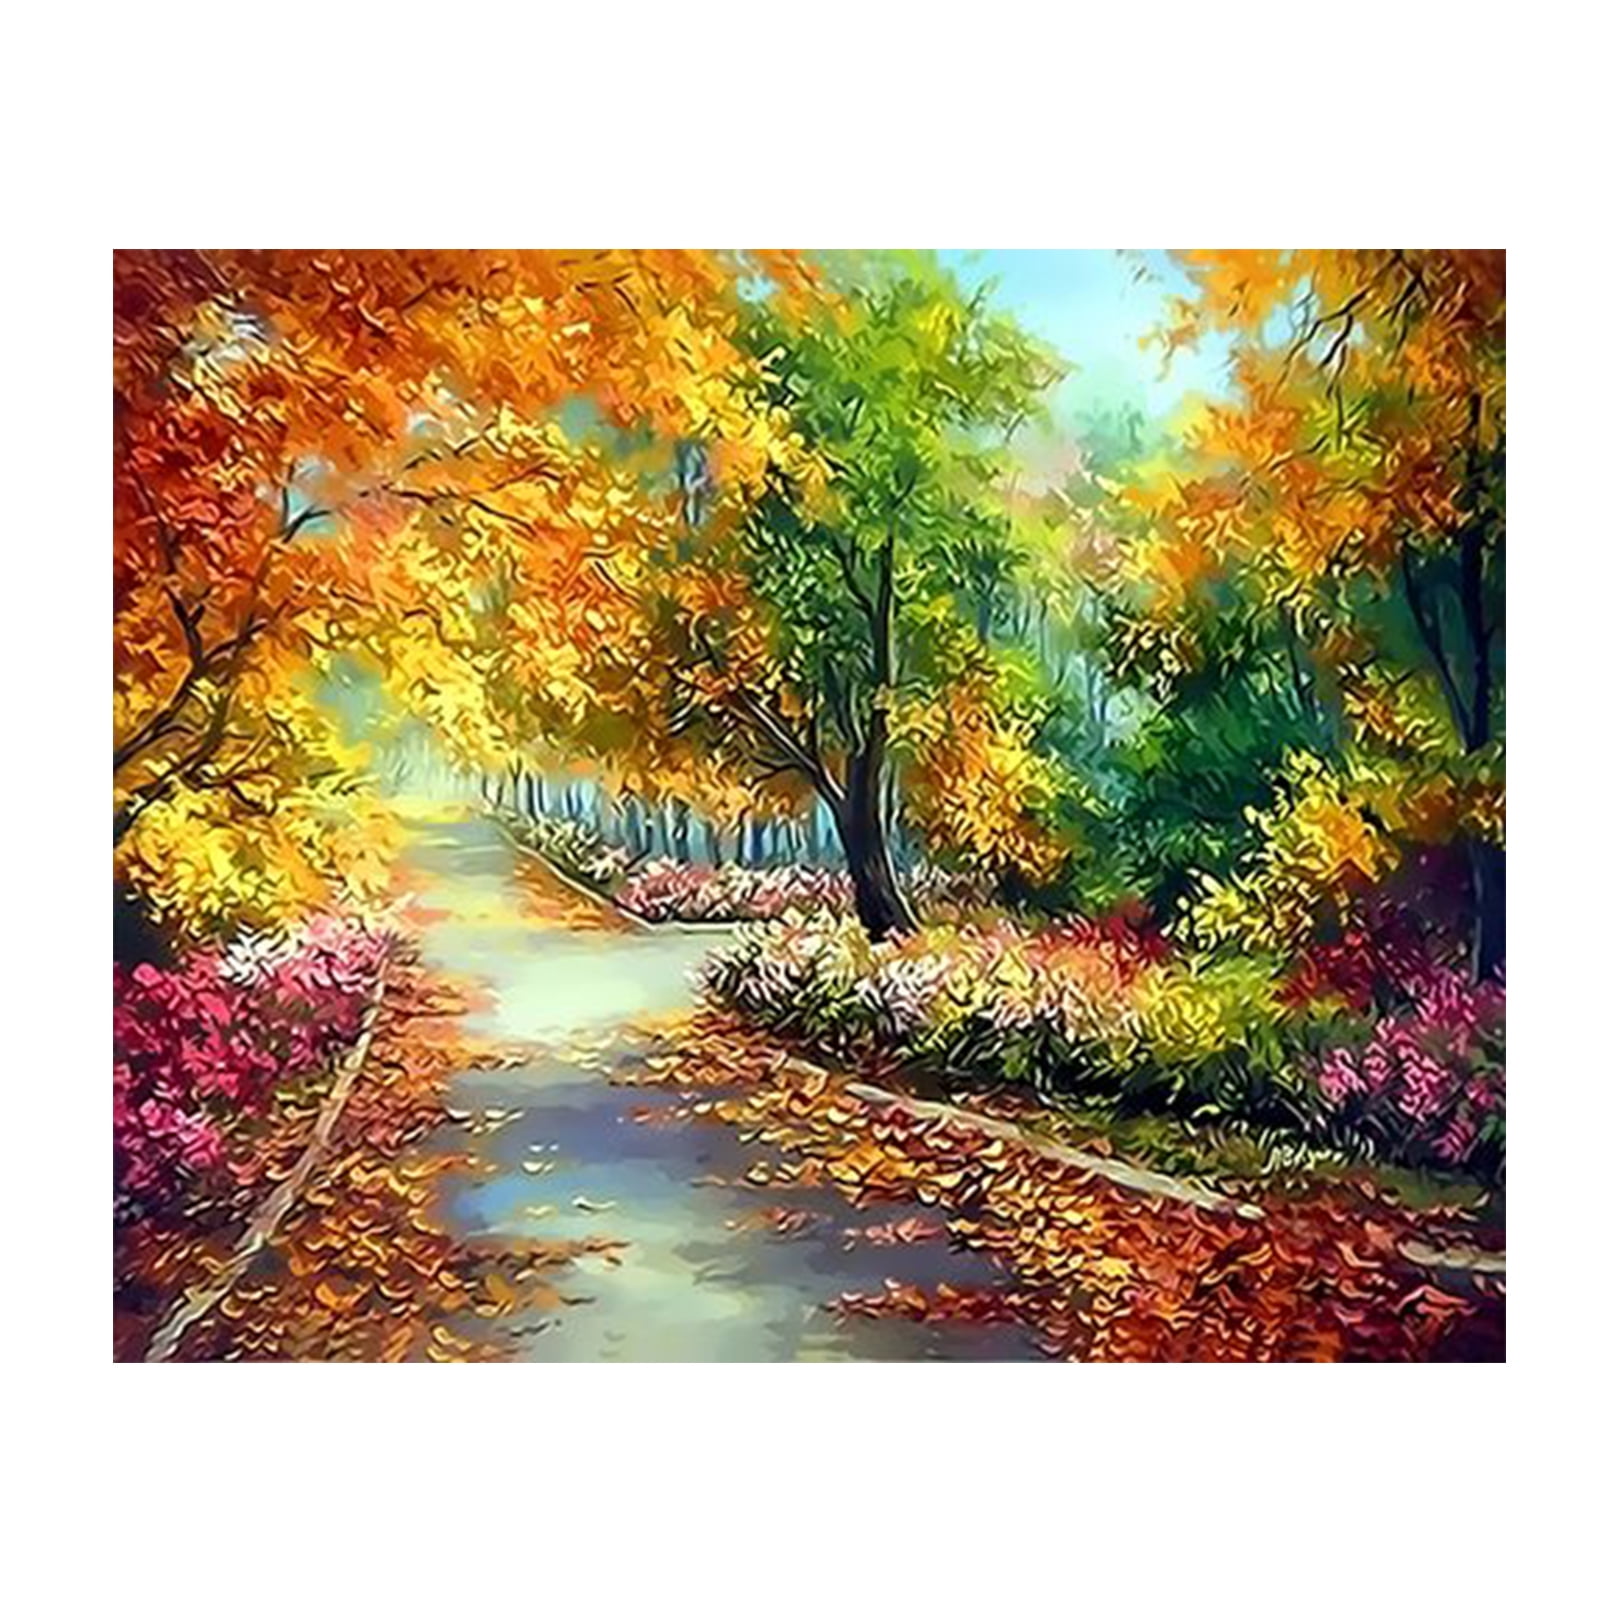 Original gift Sky painting Landscape oil art 40x50cm Forest tree painting on stretched canvas